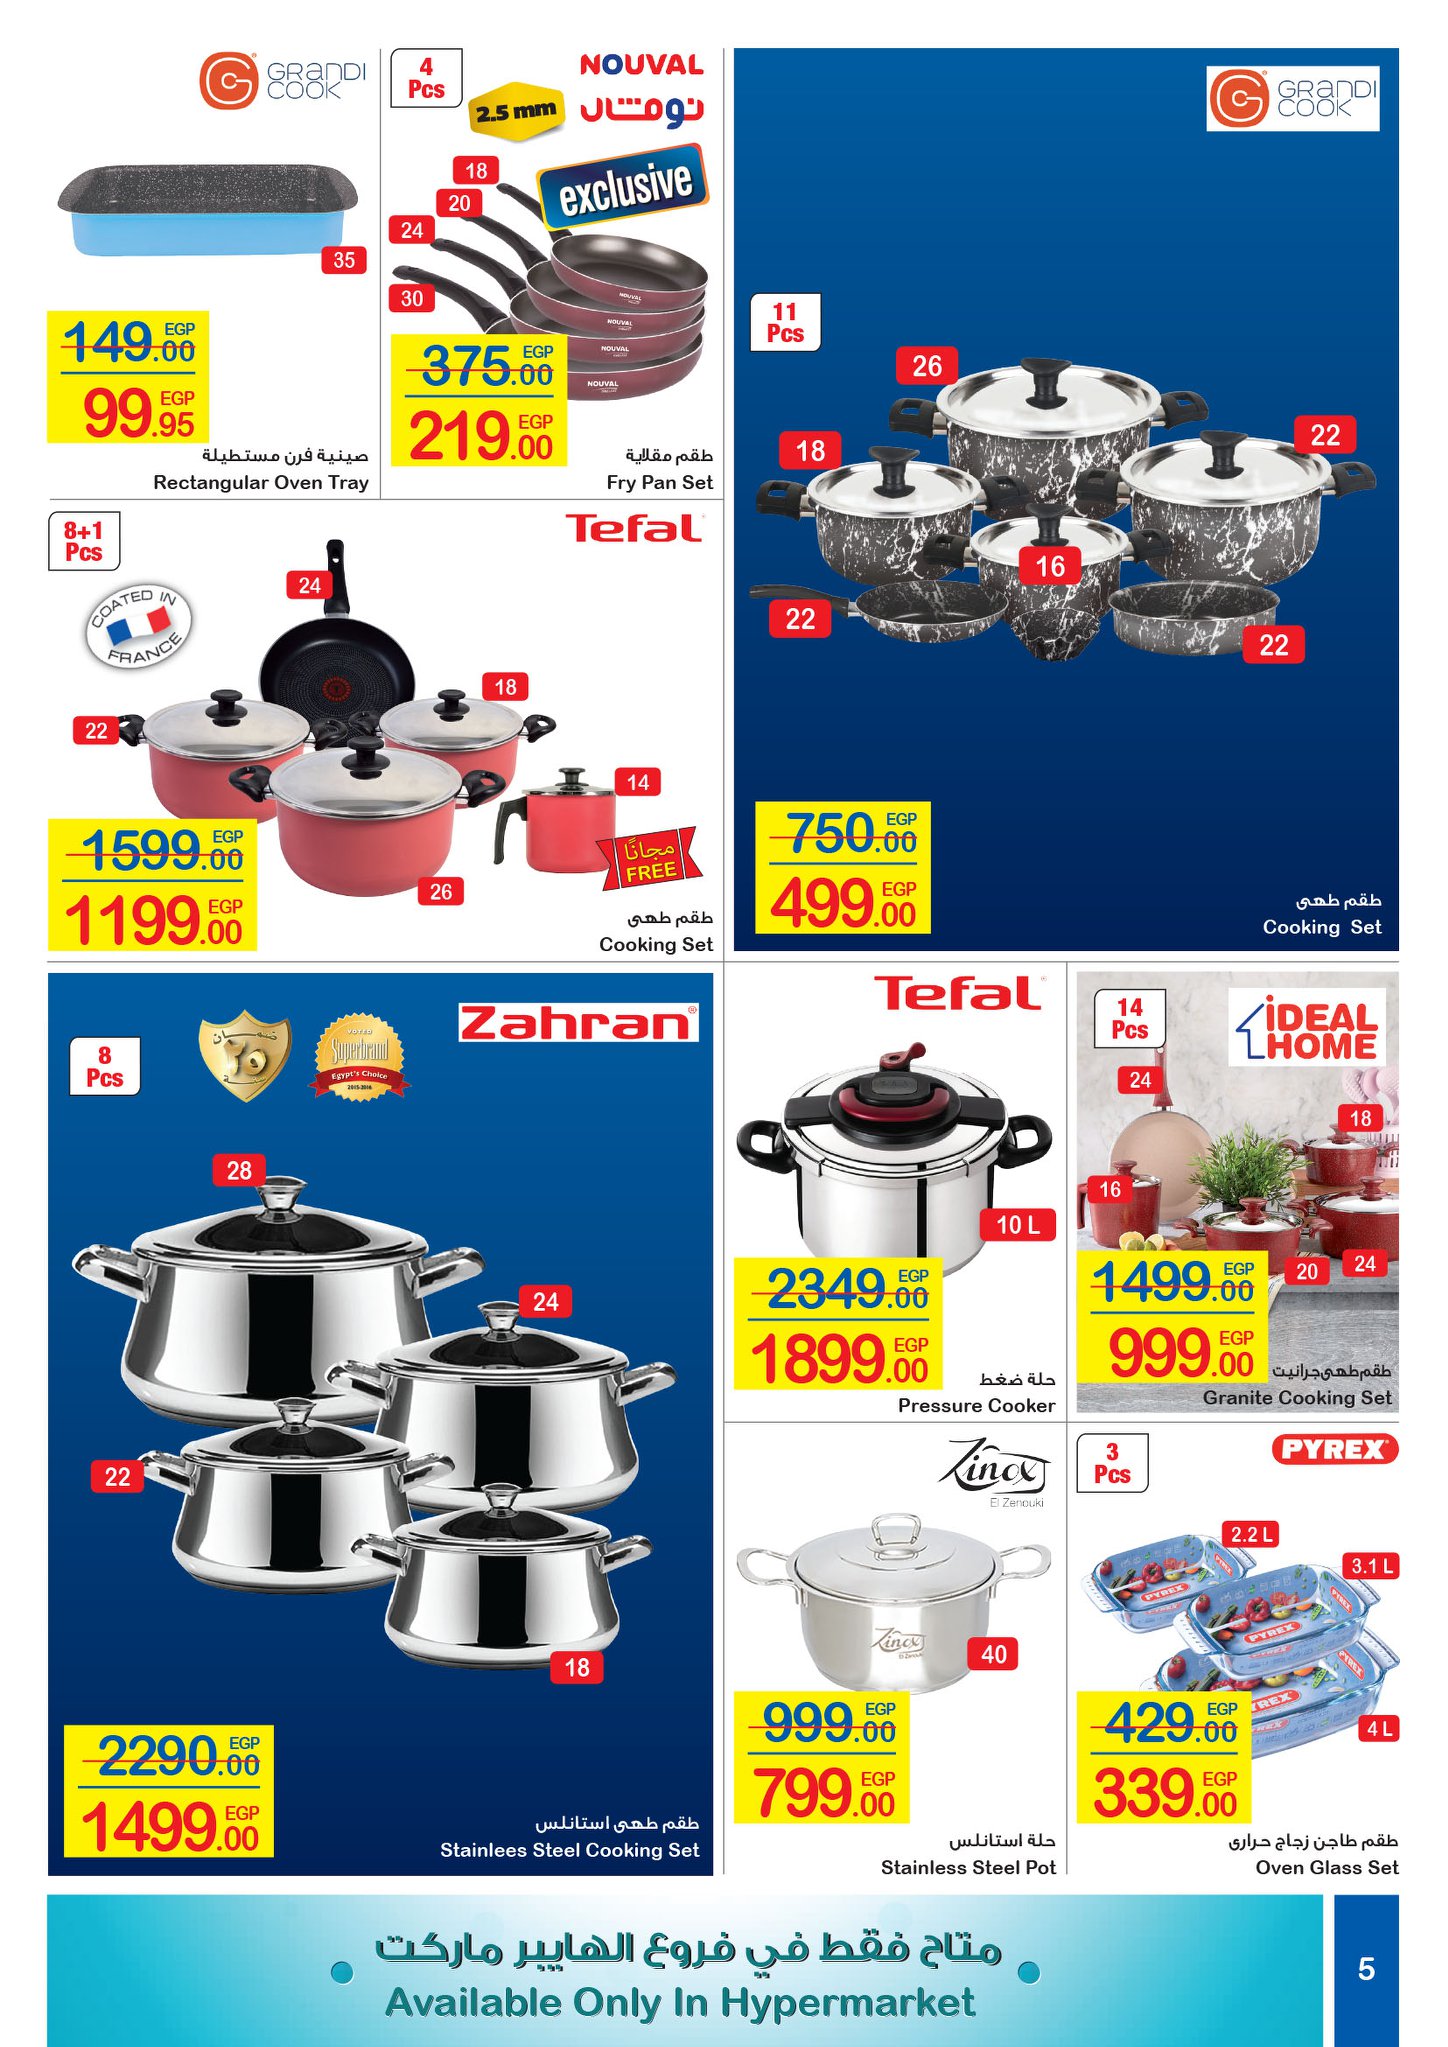 Carrefour Flyer from 16/7 till 27/7 | Carrefour Egypt 54